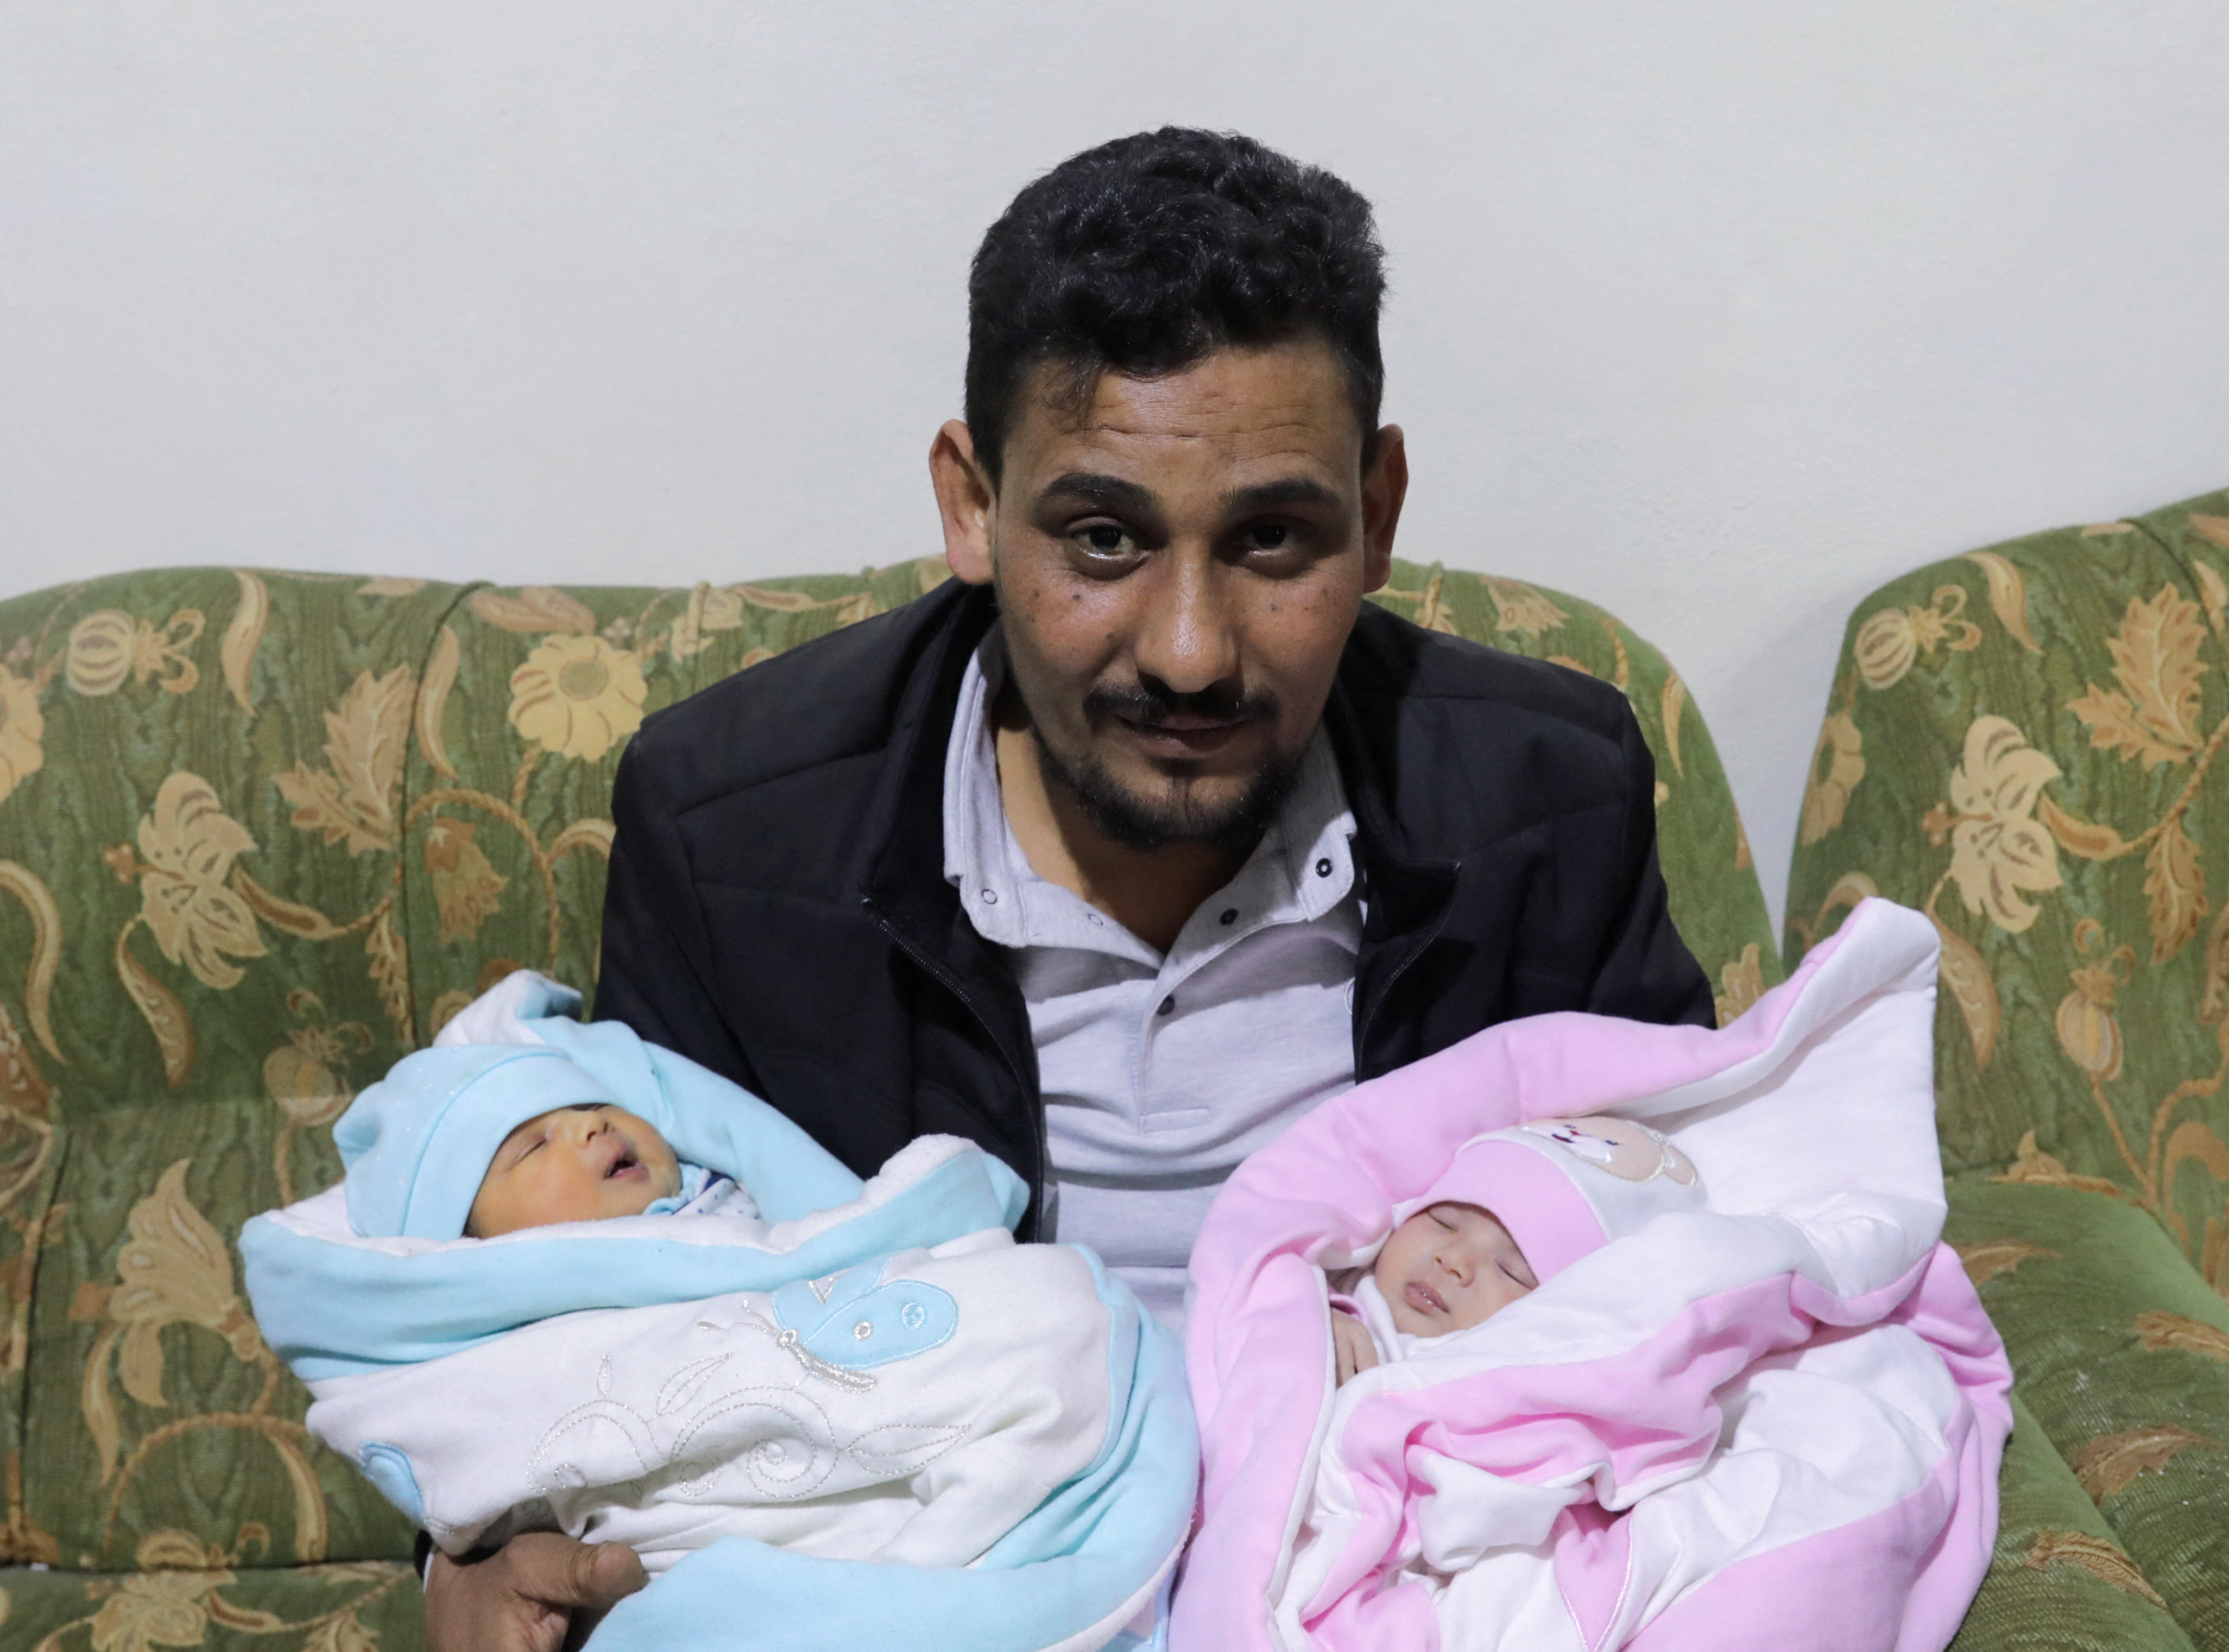 Syrian baby born in earthquake adopted by aunt and uncle